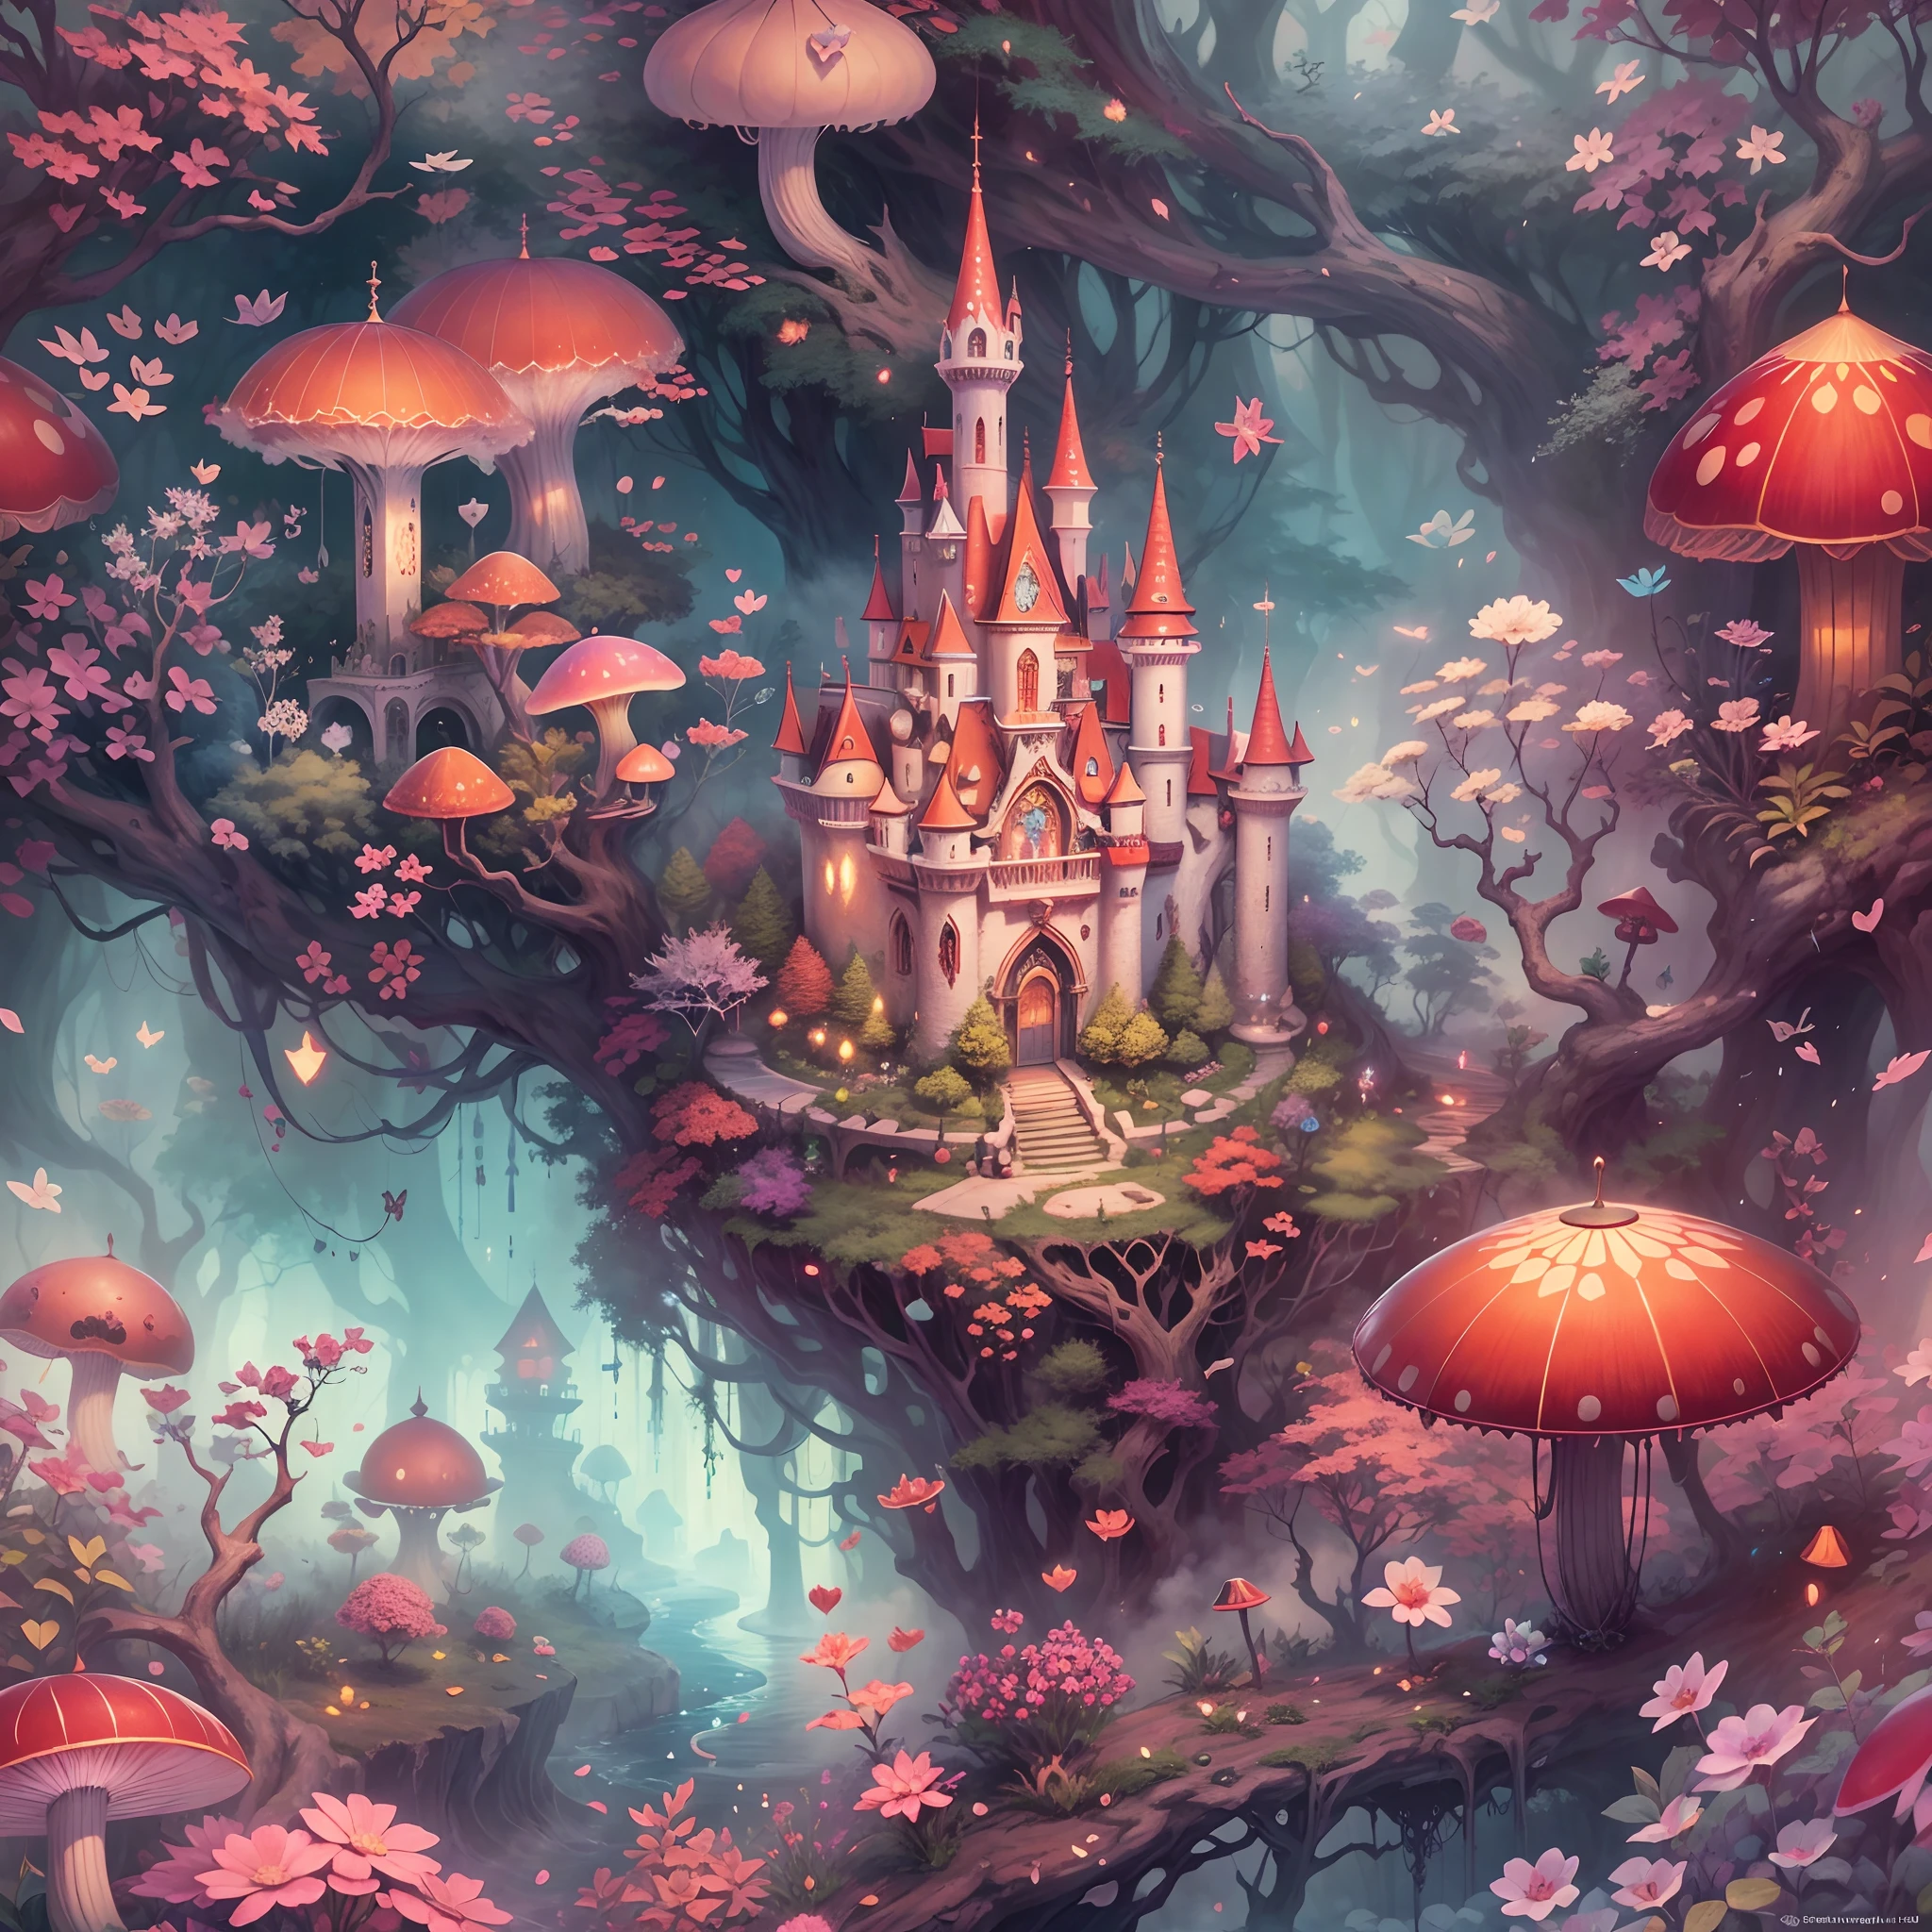 in wonderland,illustration,an enchanted forest,Magic and fantasy elements,Queen  of Hearts Castle - SeaArt AI